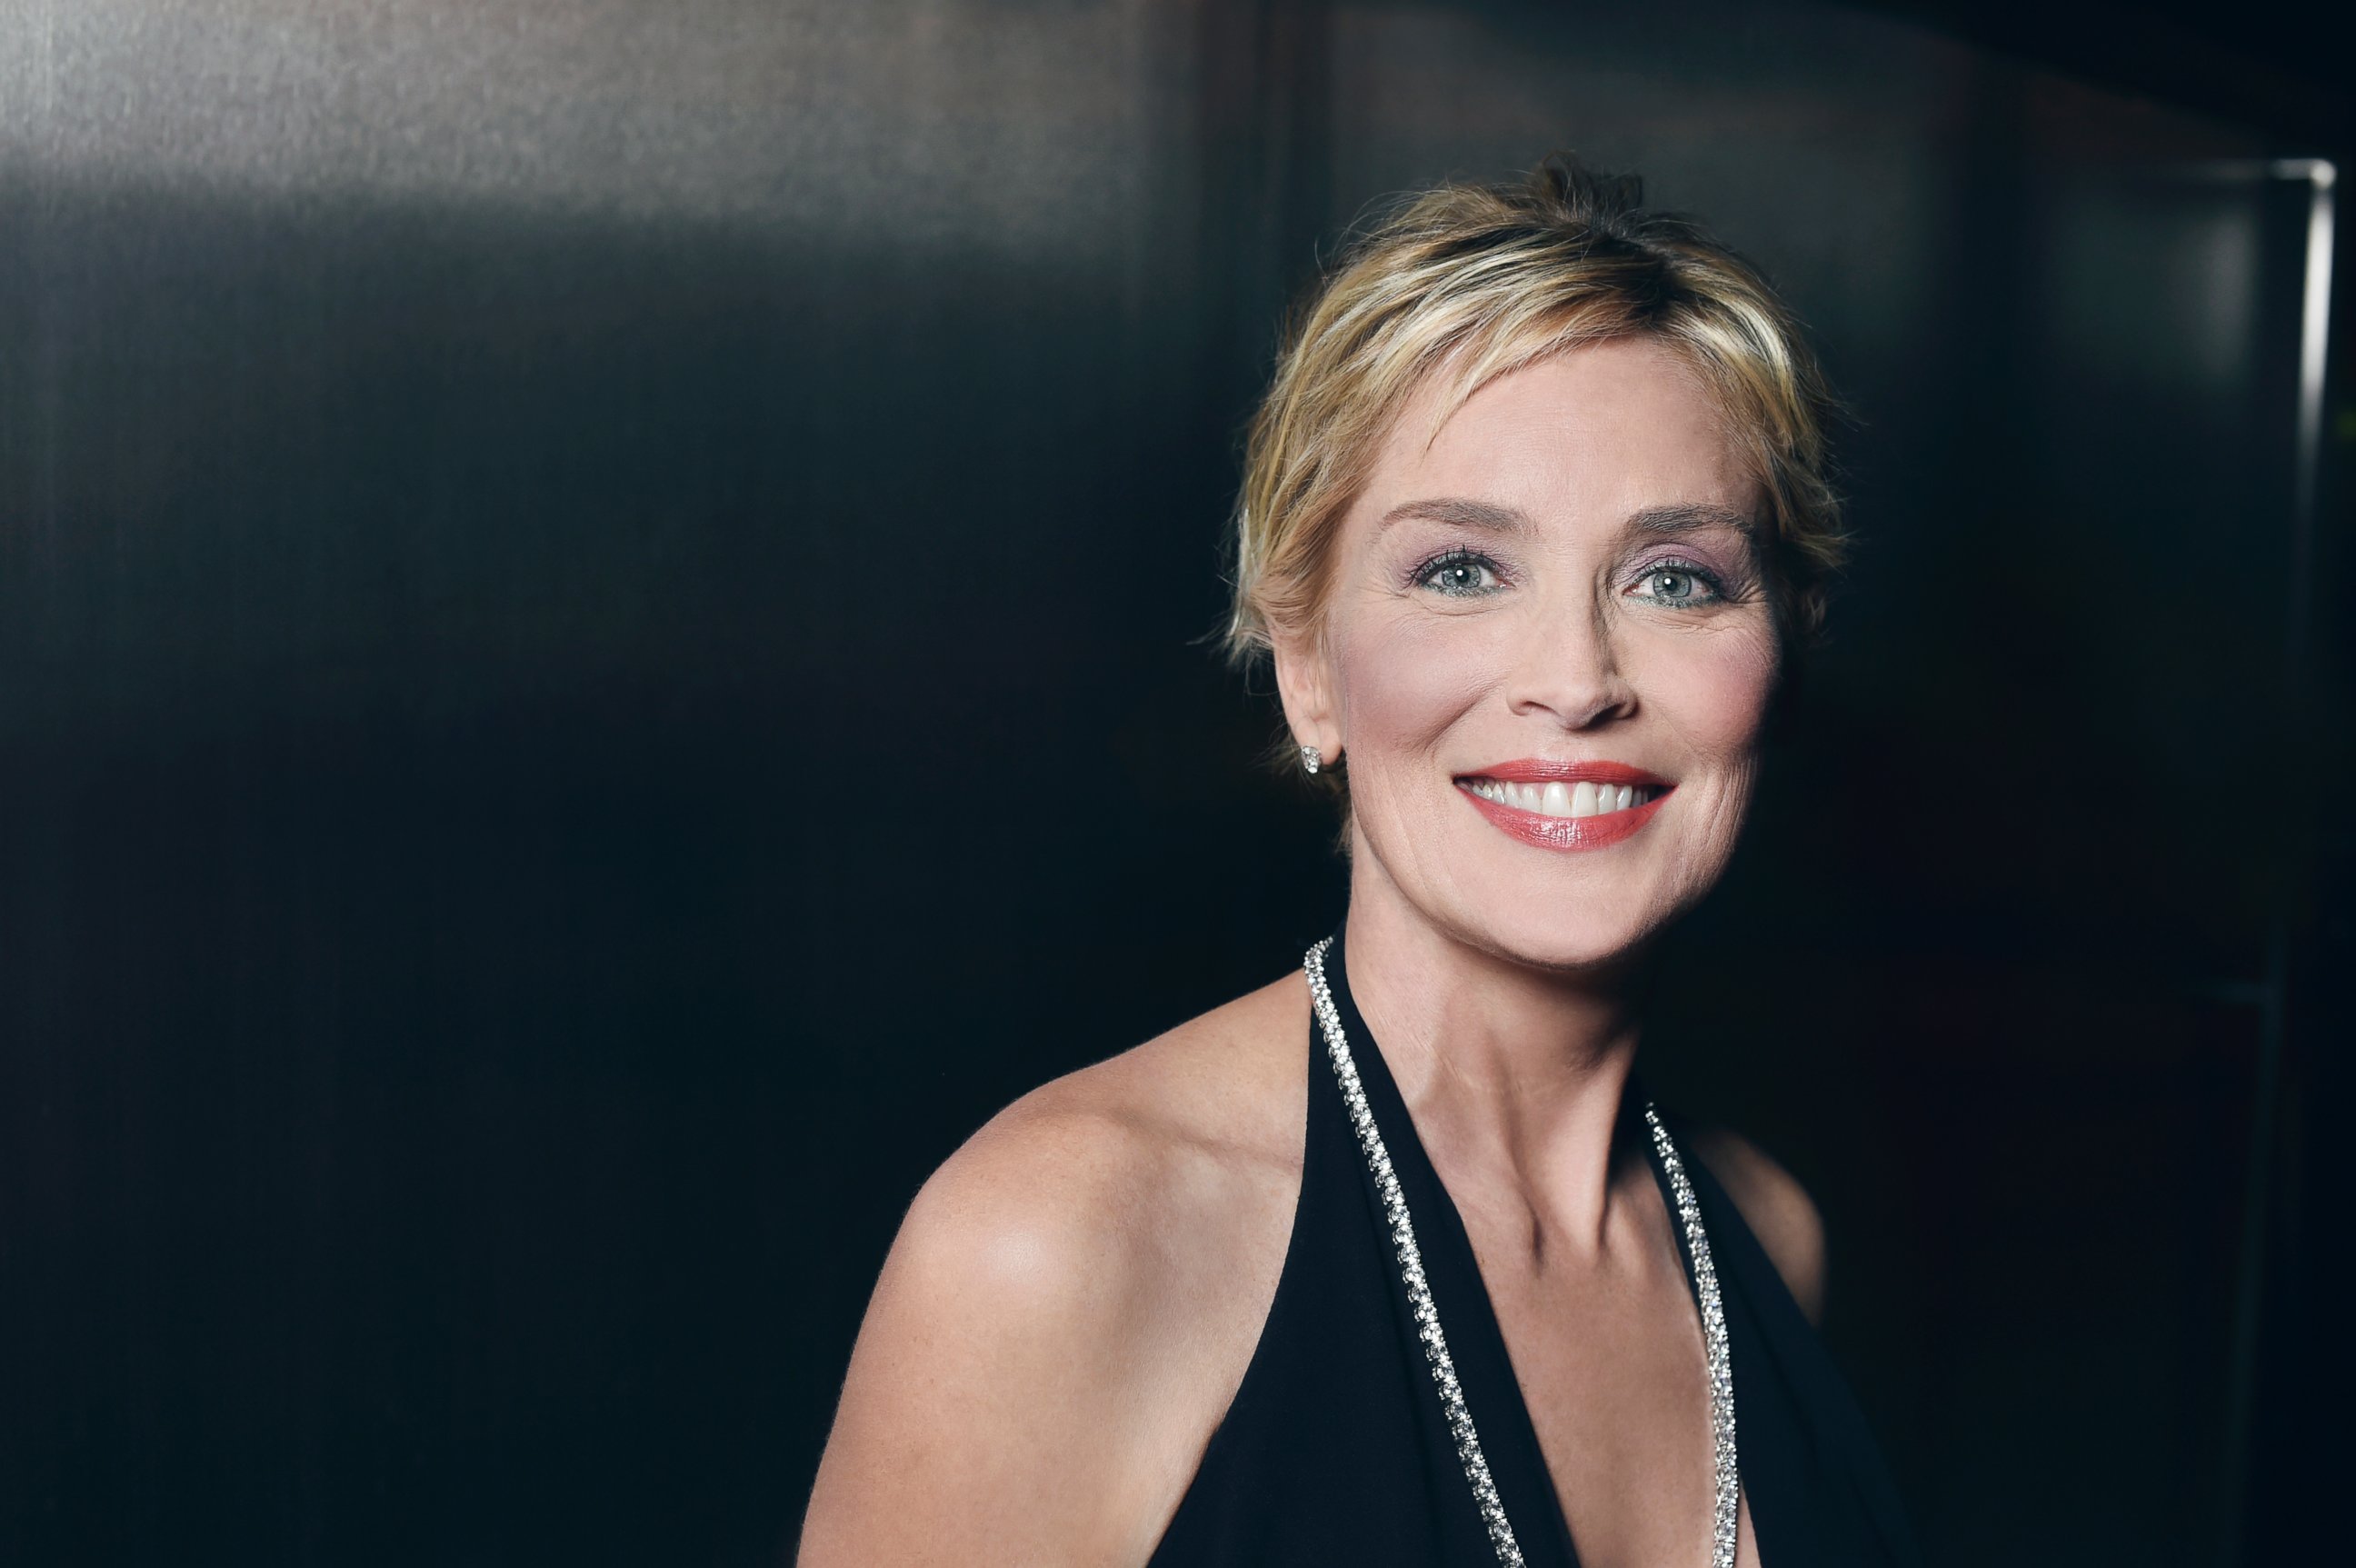 PHOTO: Sharon Stone poses for a portrait at the amfAR LA Inspiration Gala on Oct. 29, 2014 in Los Angeles.